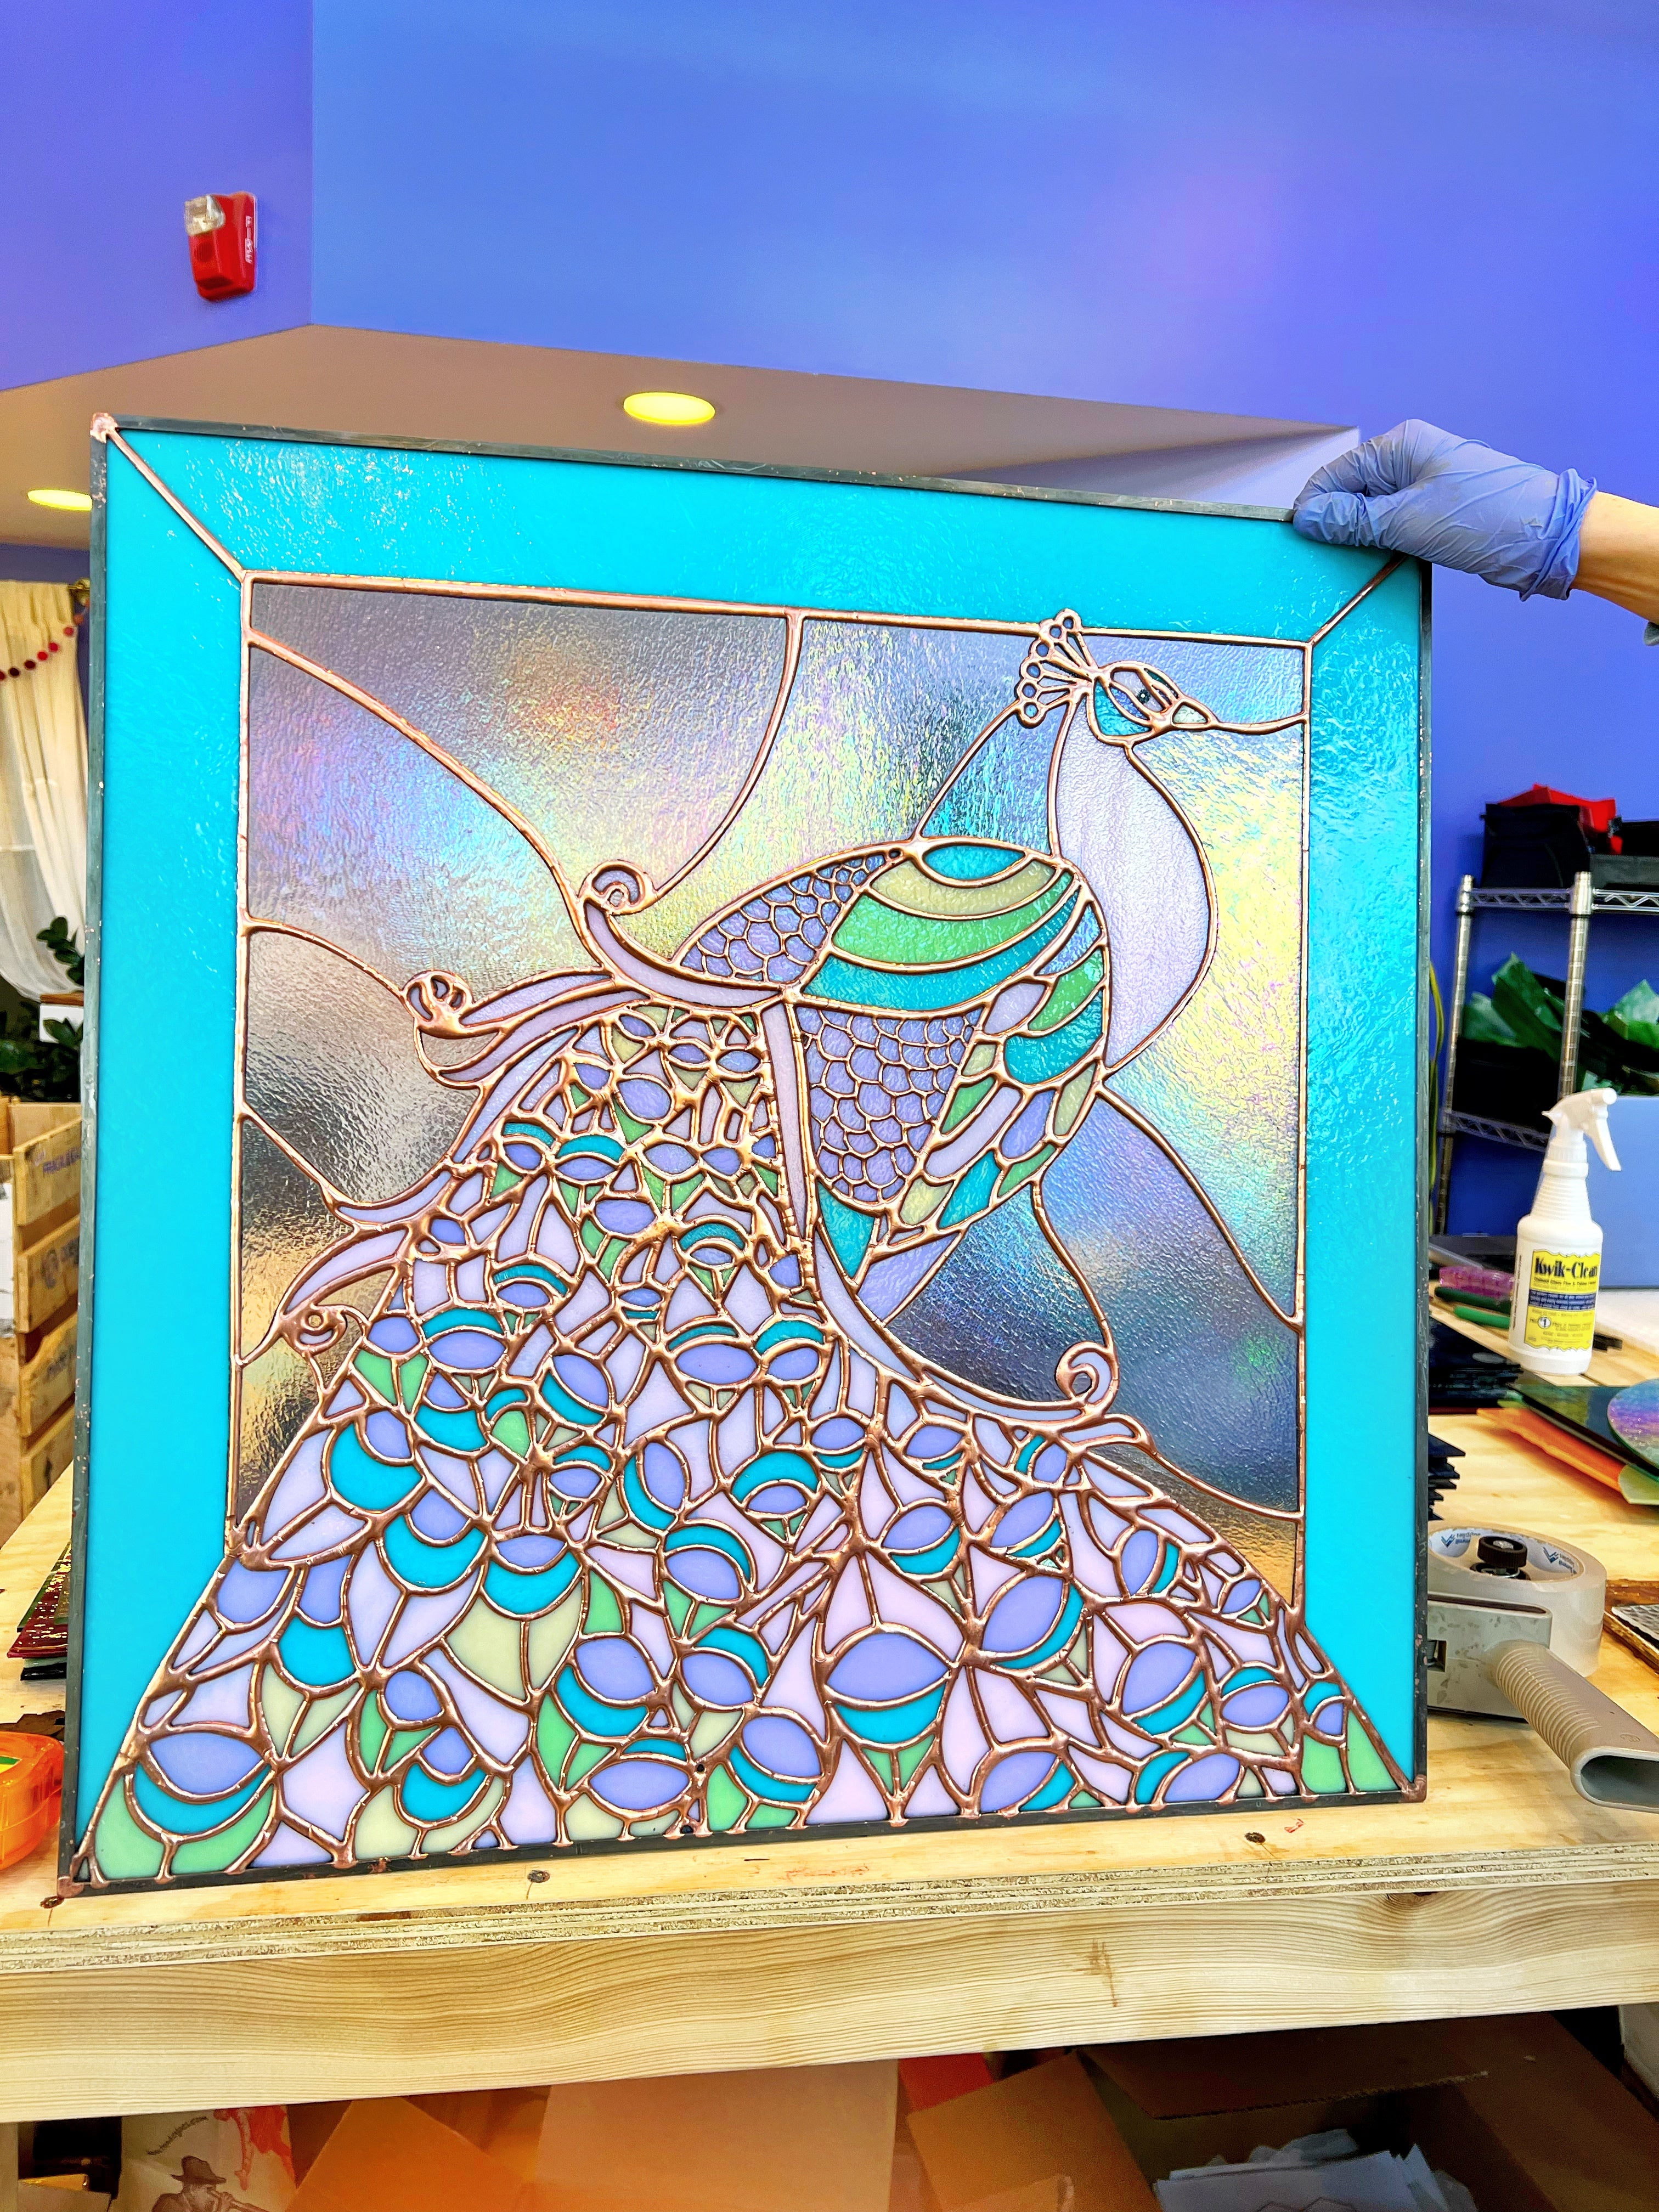 Peacock stained glass art with blues, purples and greens